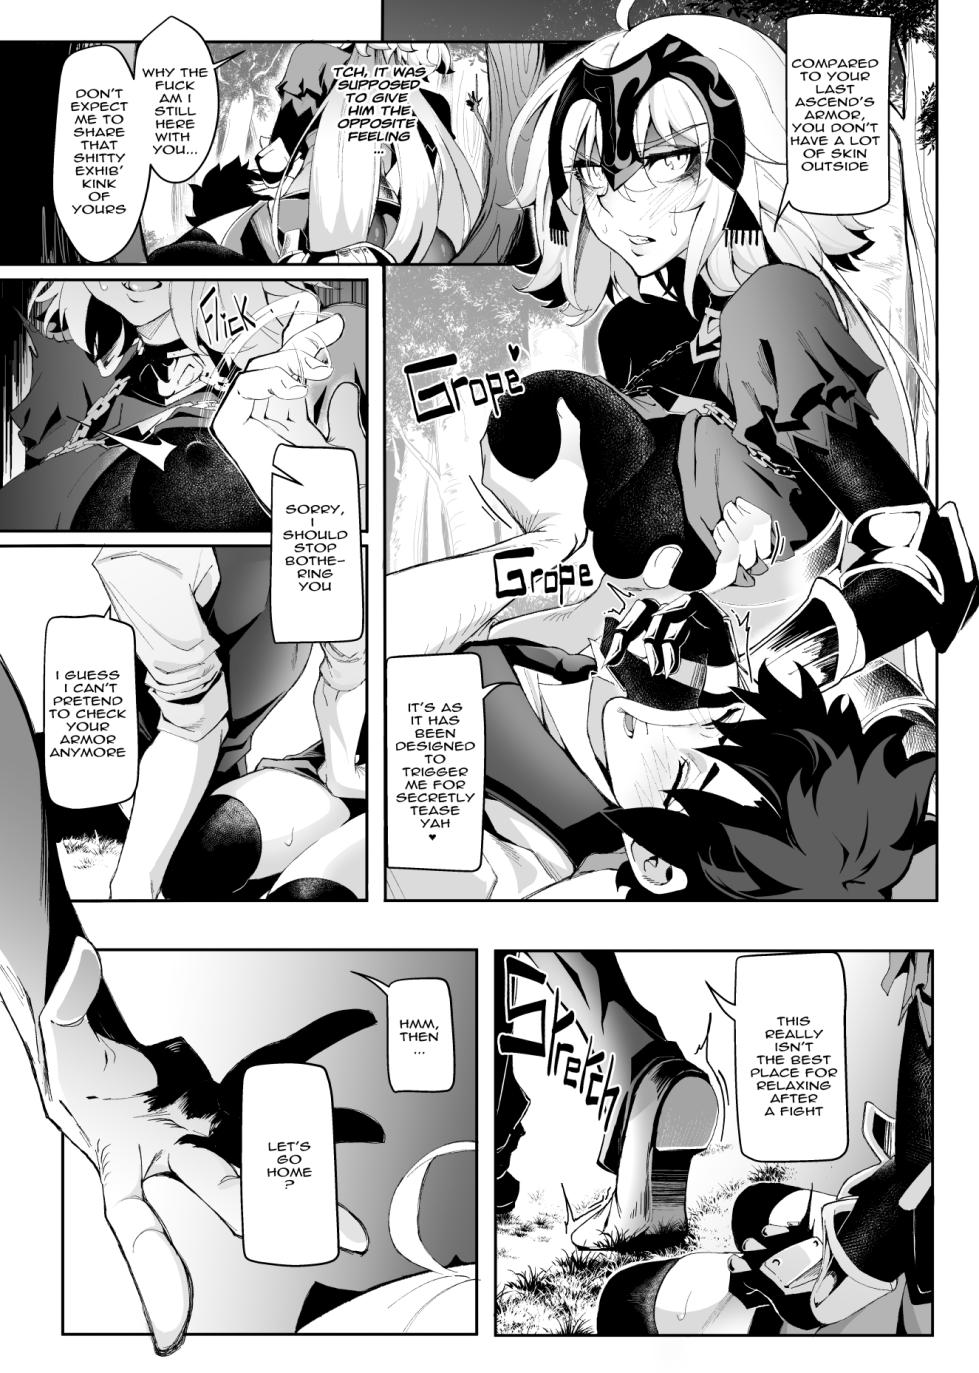 [Kid] The Baddest (Fate/Grand Order) - Page 11